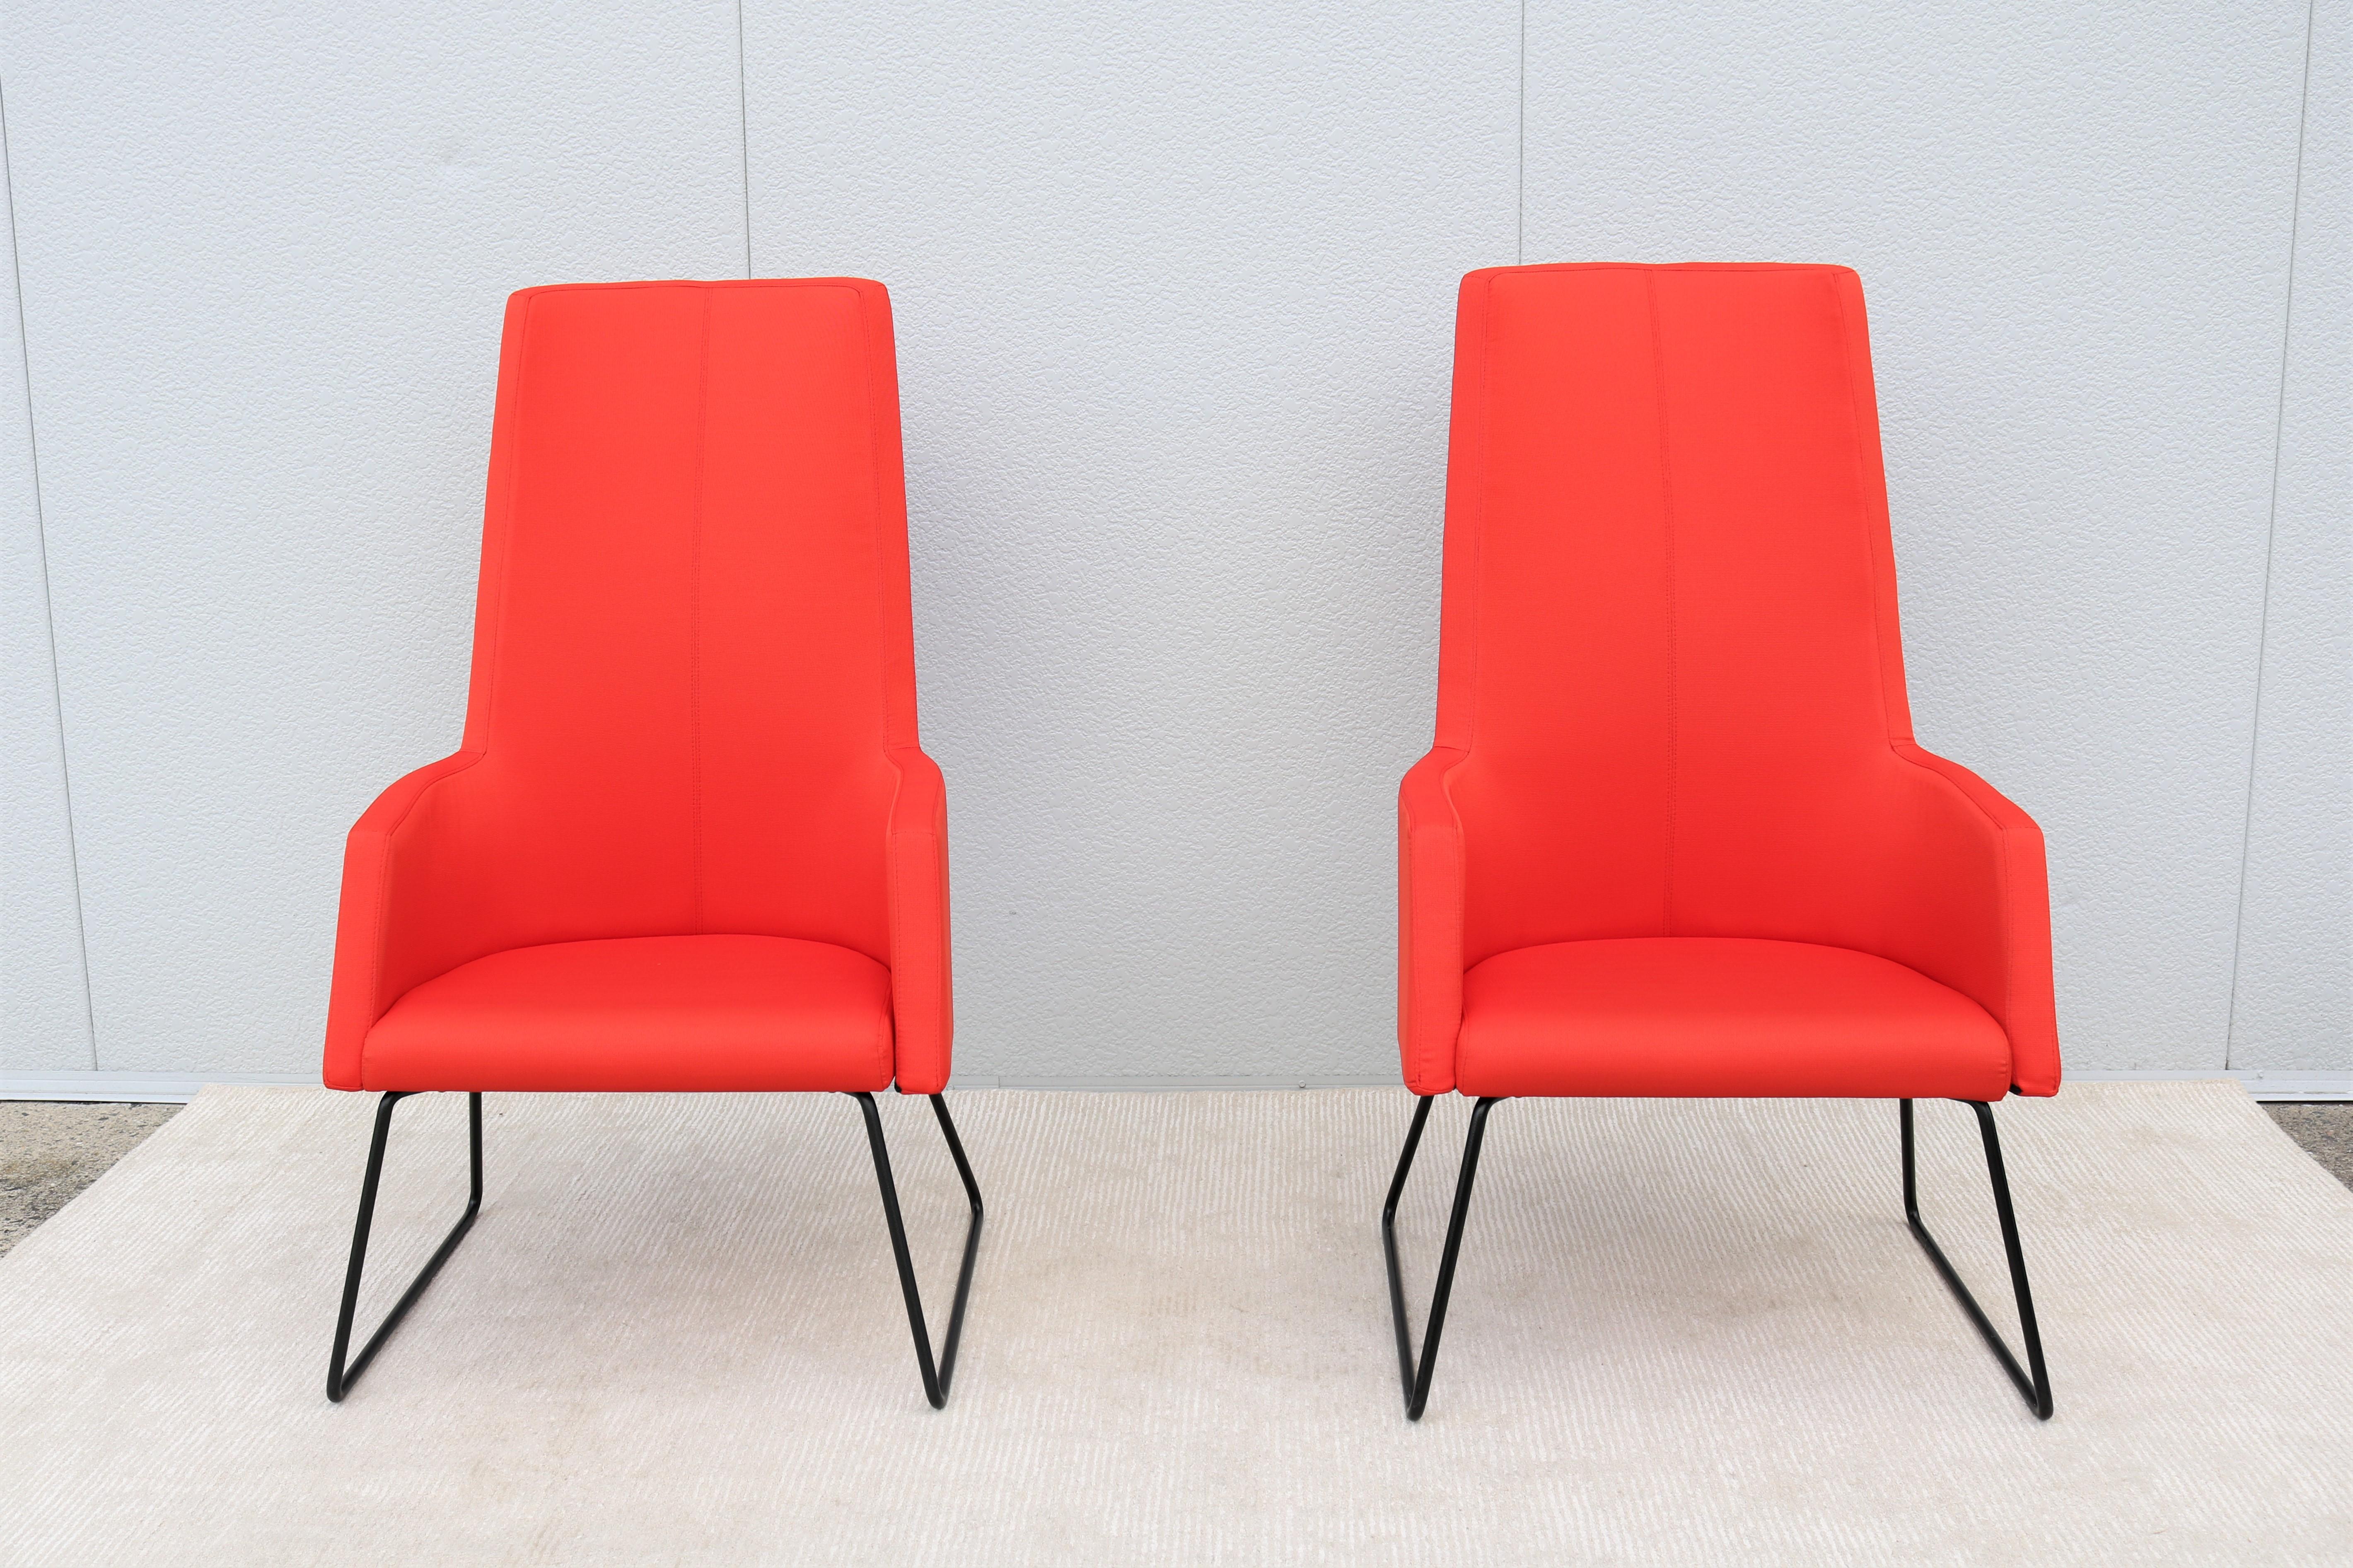 Contemporary Modern Rouillard Solo High Back Red Lounge Chairs, a Pair In Excellent Condition For Sale In Secaucus, NJ